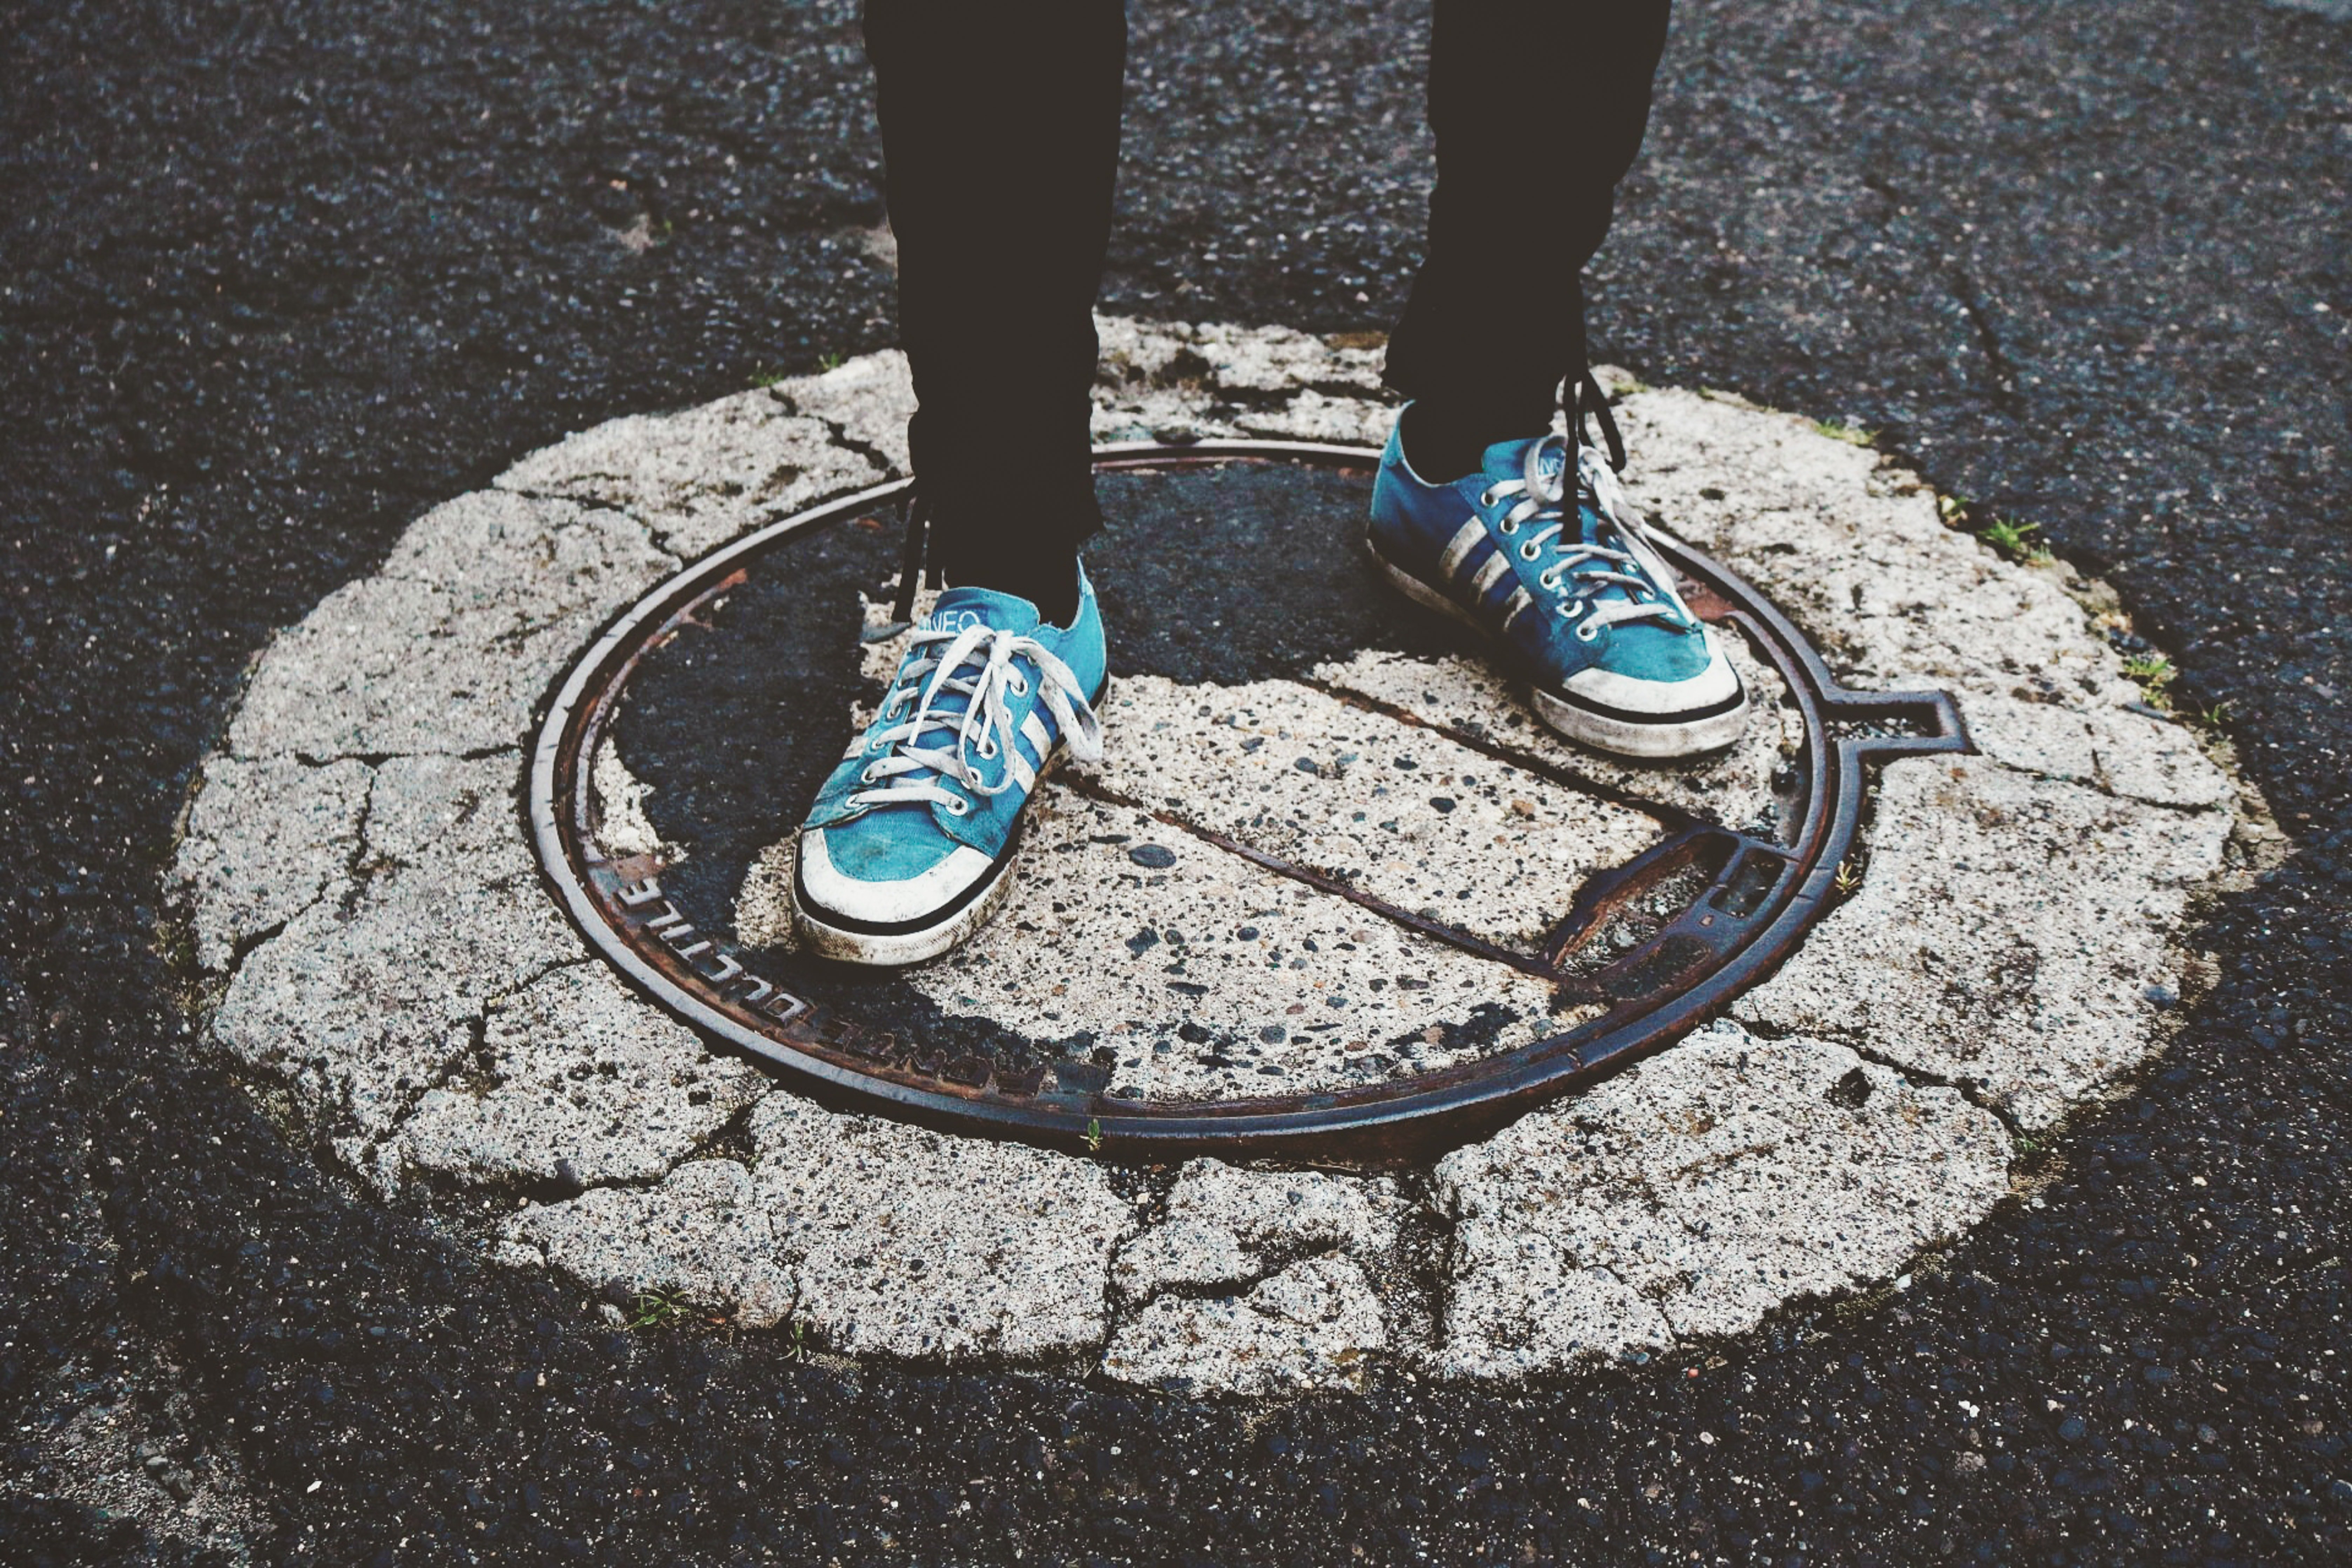 The elderly stranger offered the young man to jump on the manhole cover. | Photo: Pexels/Sebastian Stam